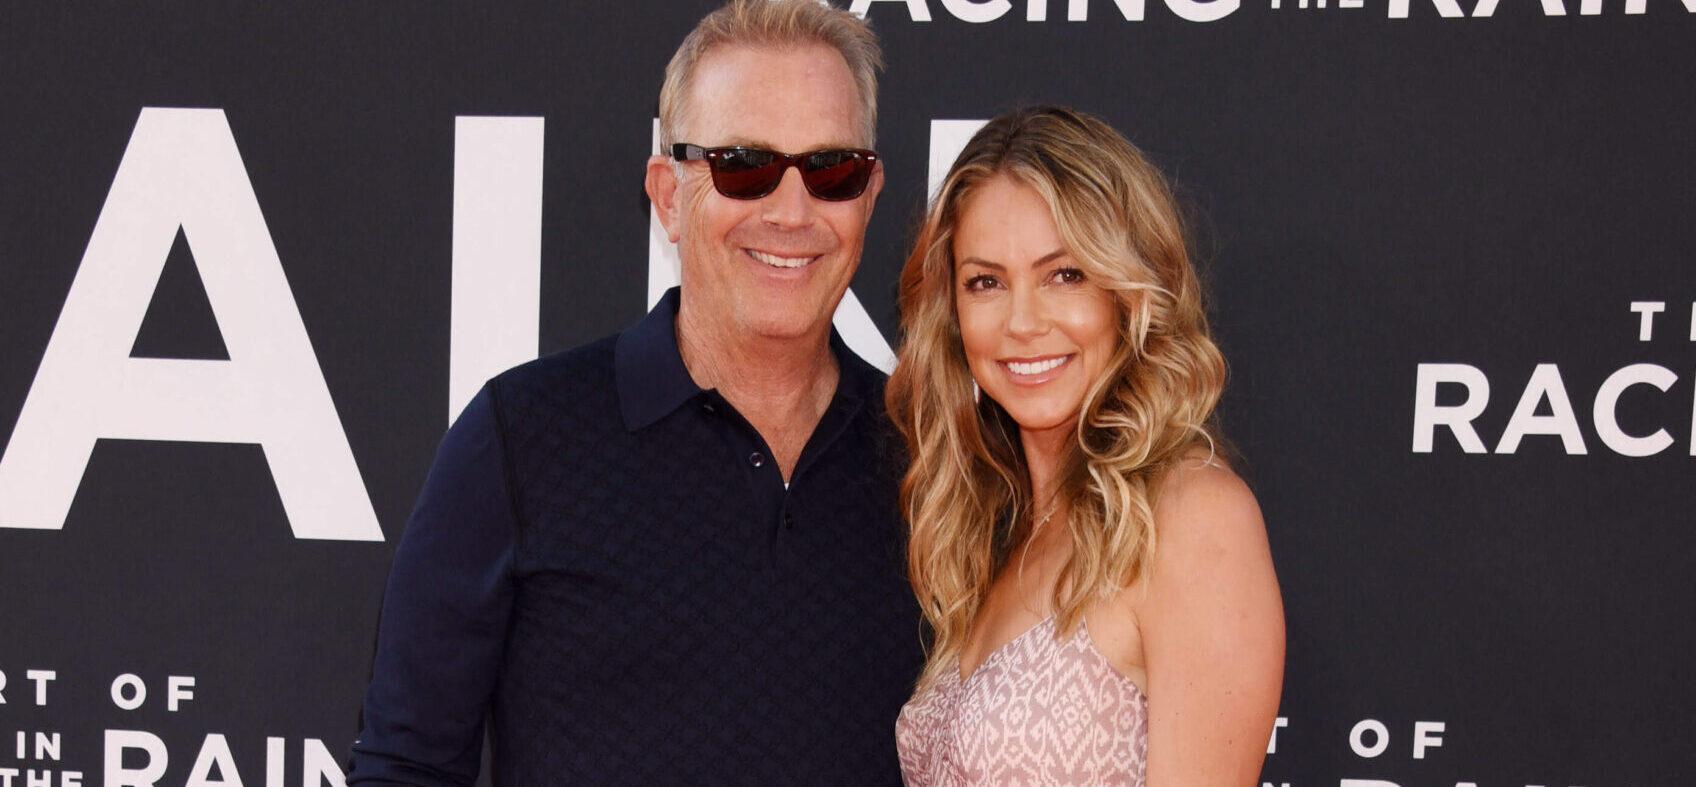 Kevin Costner’s Ex-Wife Is Asking For $2 Million A Year In Child Support